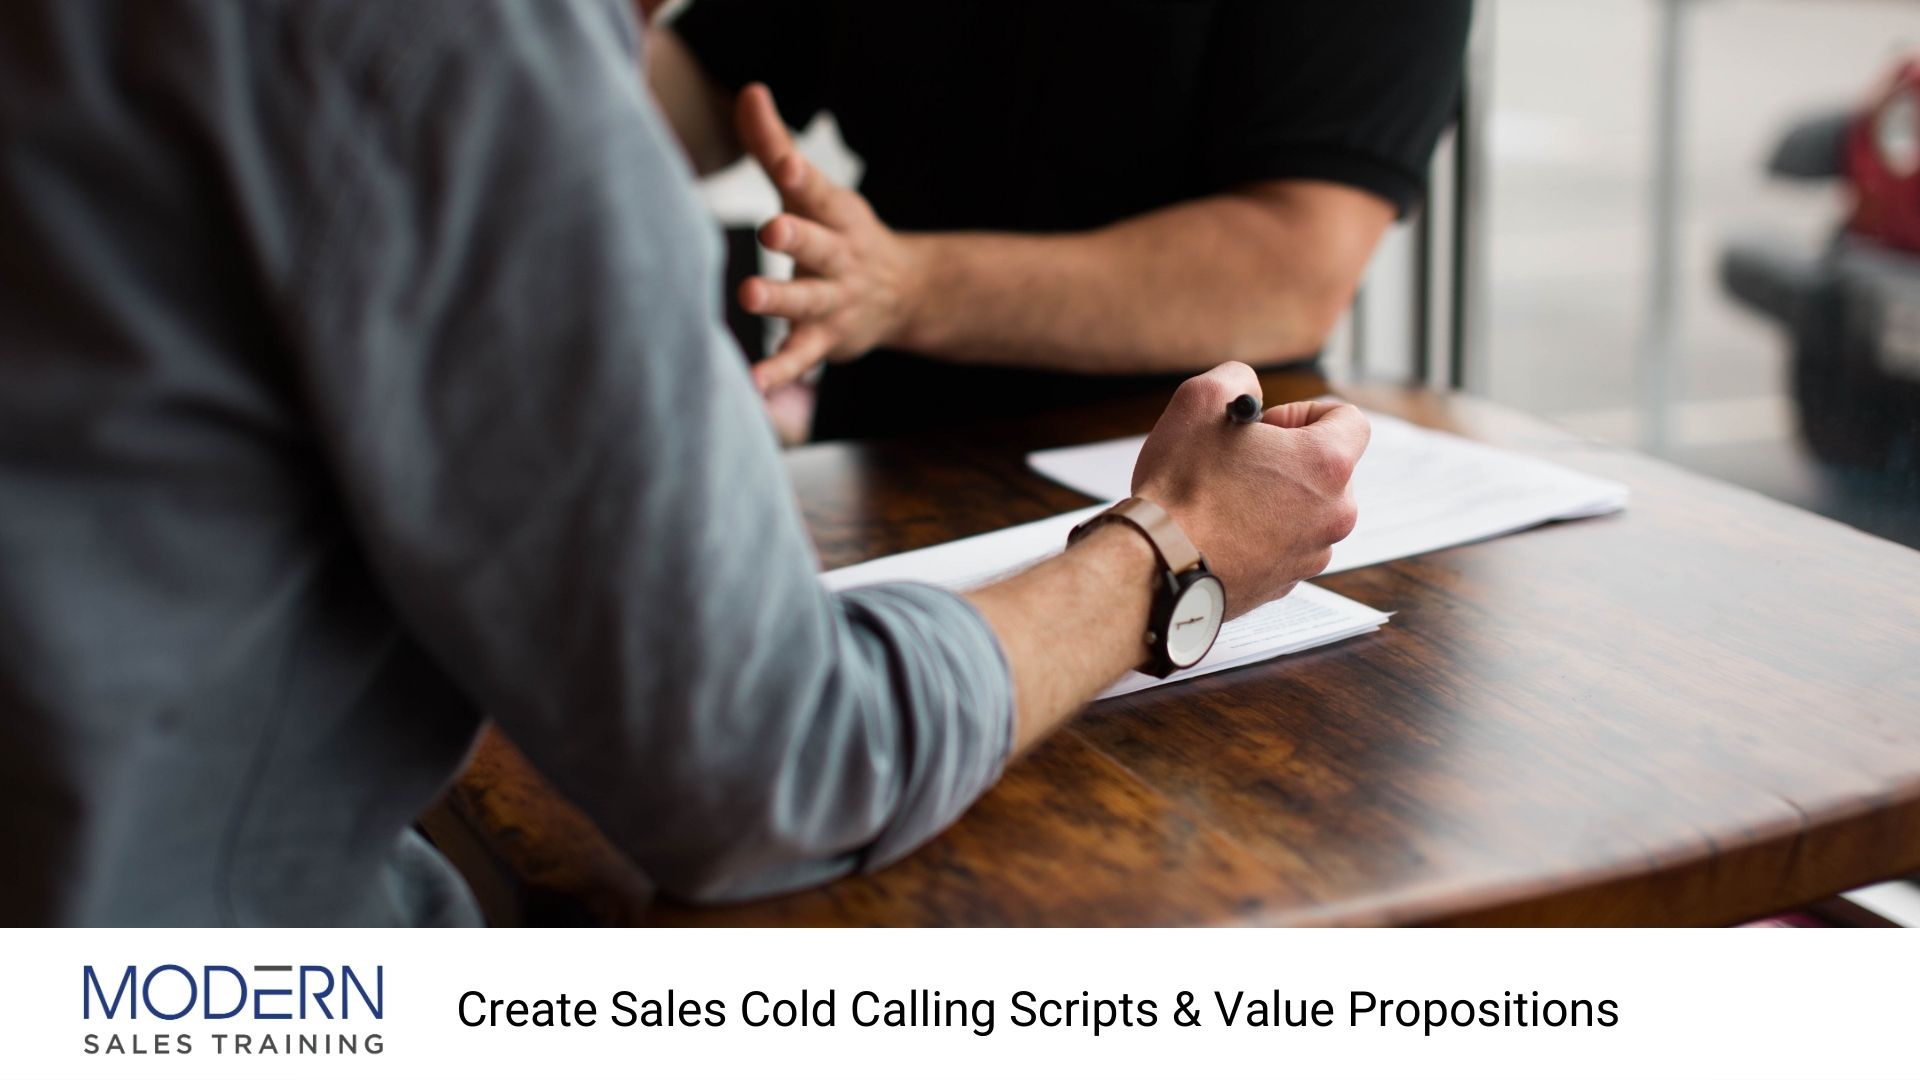 Create-B2B-Sales-Cold-Calling-Scripts-Sales-Training-Course-Modern-Sales-Training